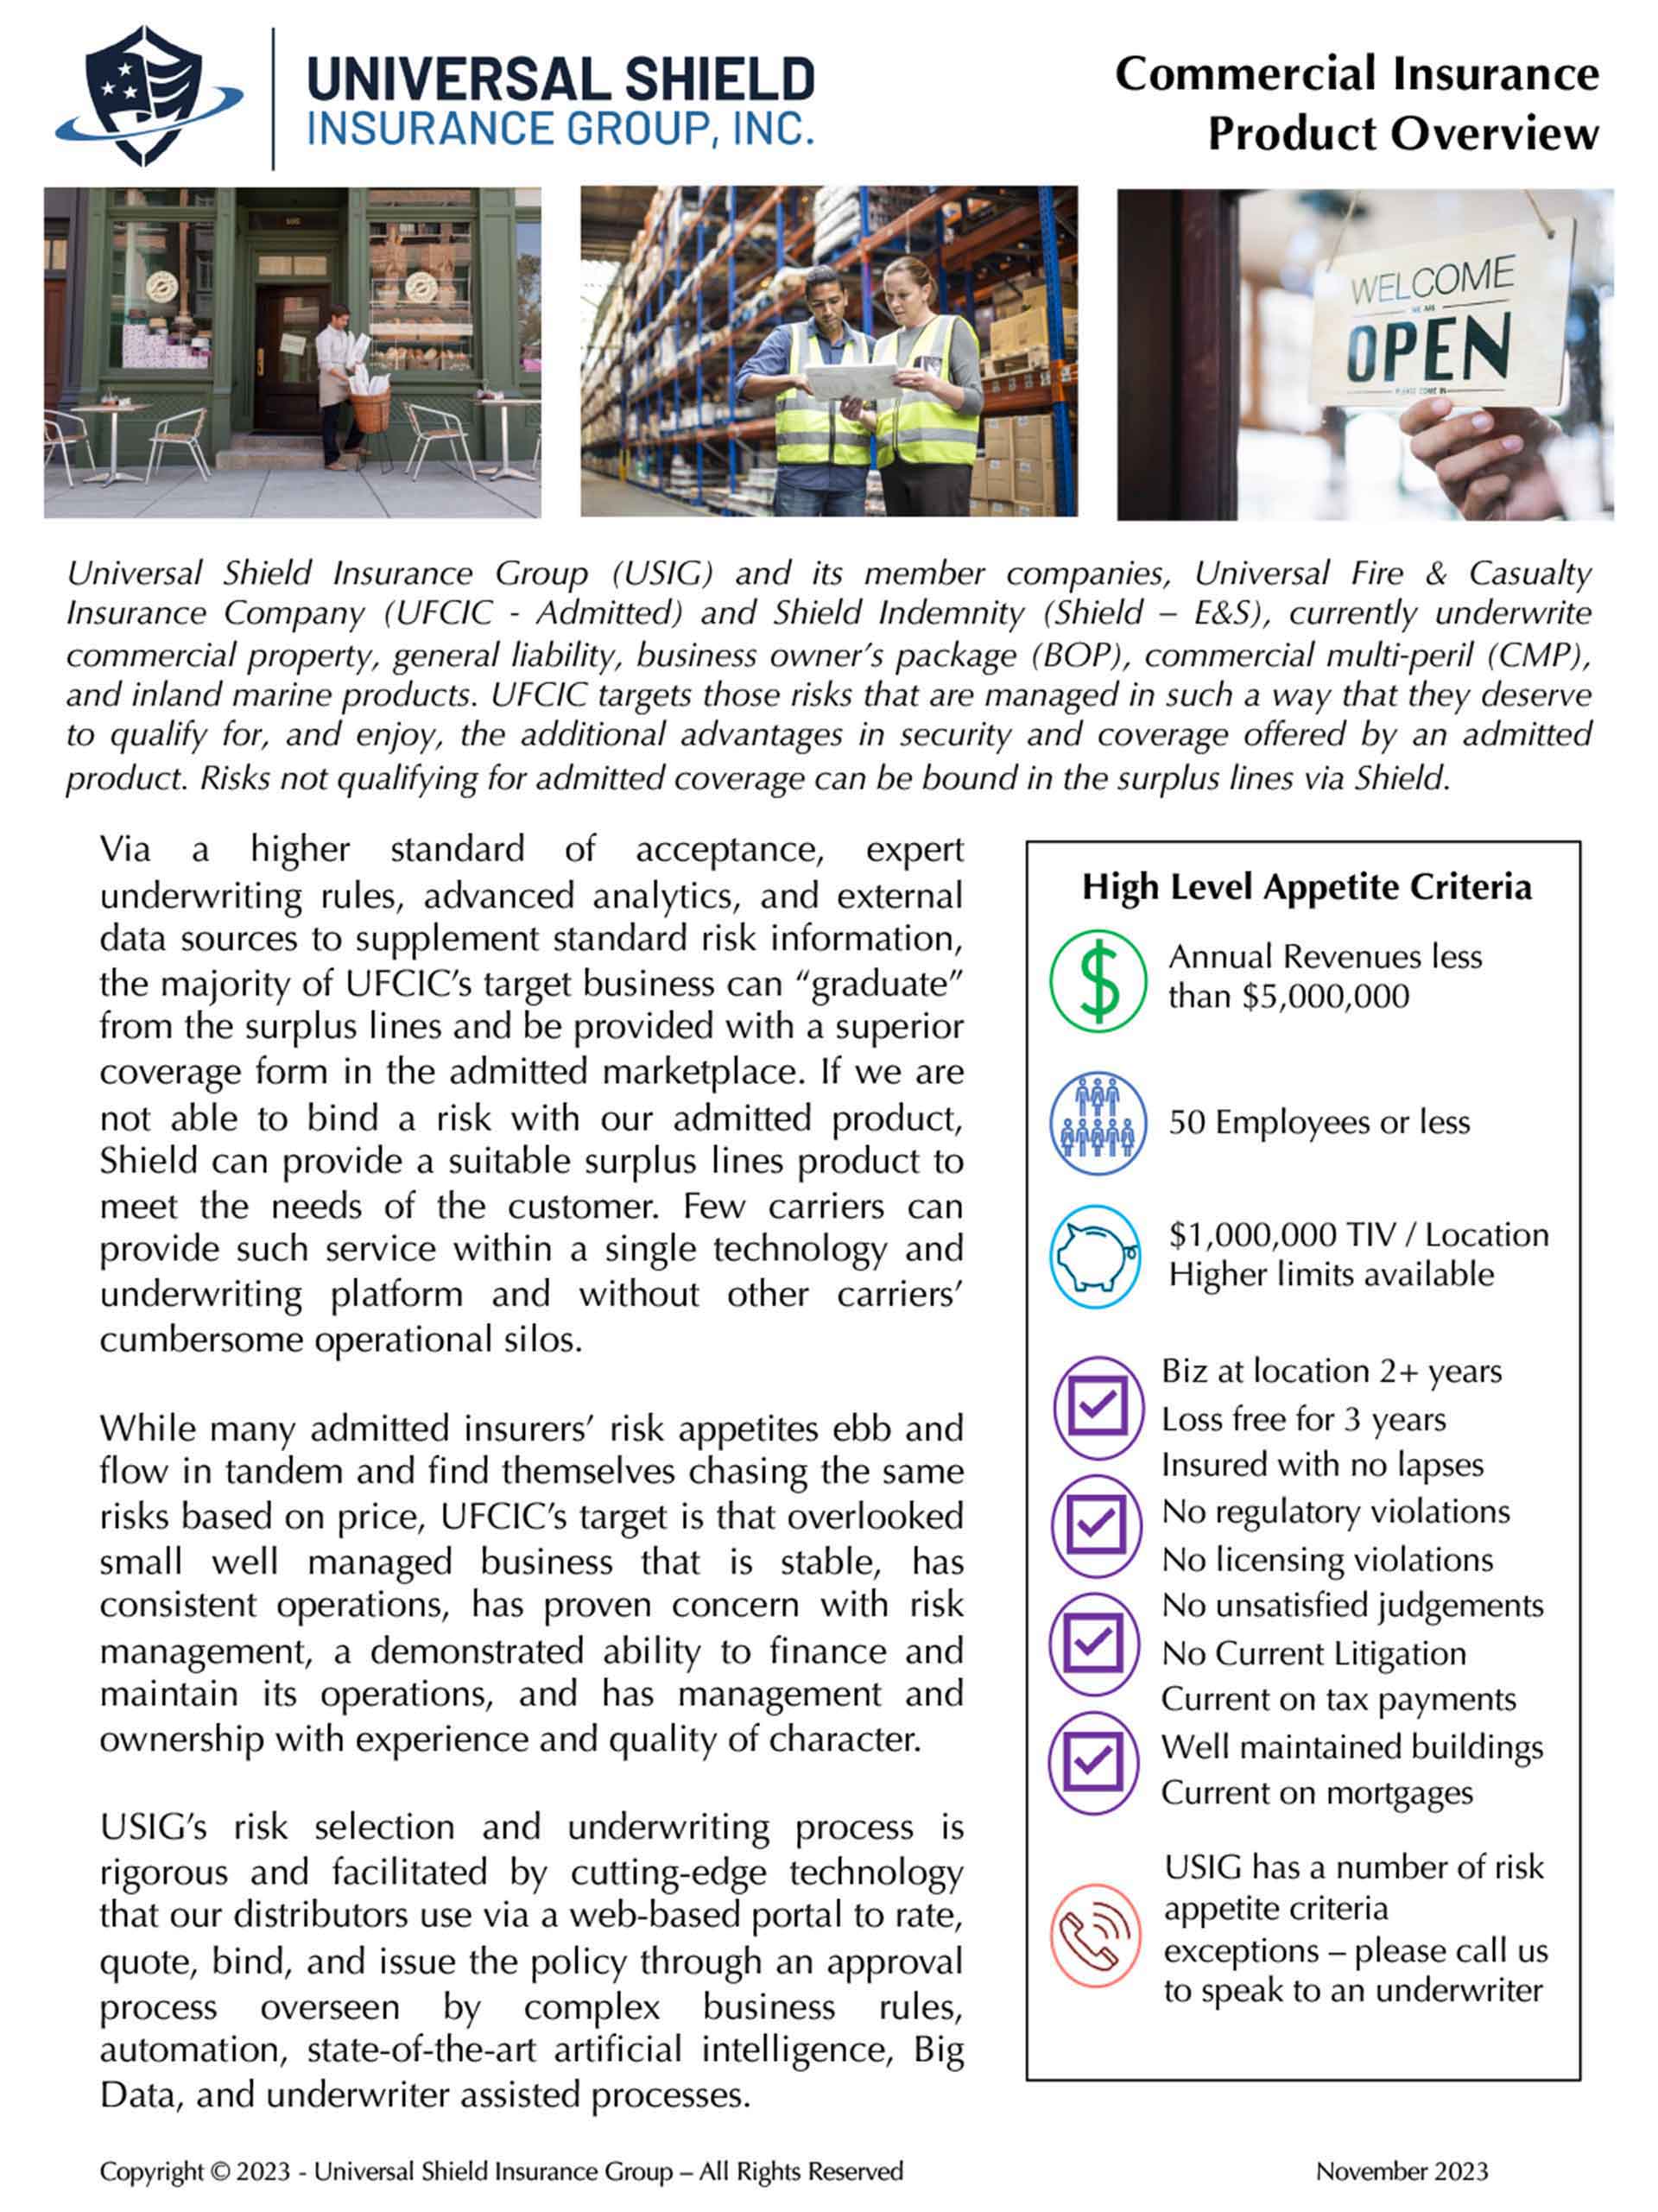 <strong>UFCIC Commercial Insurance Product Overview Flyer</strong>